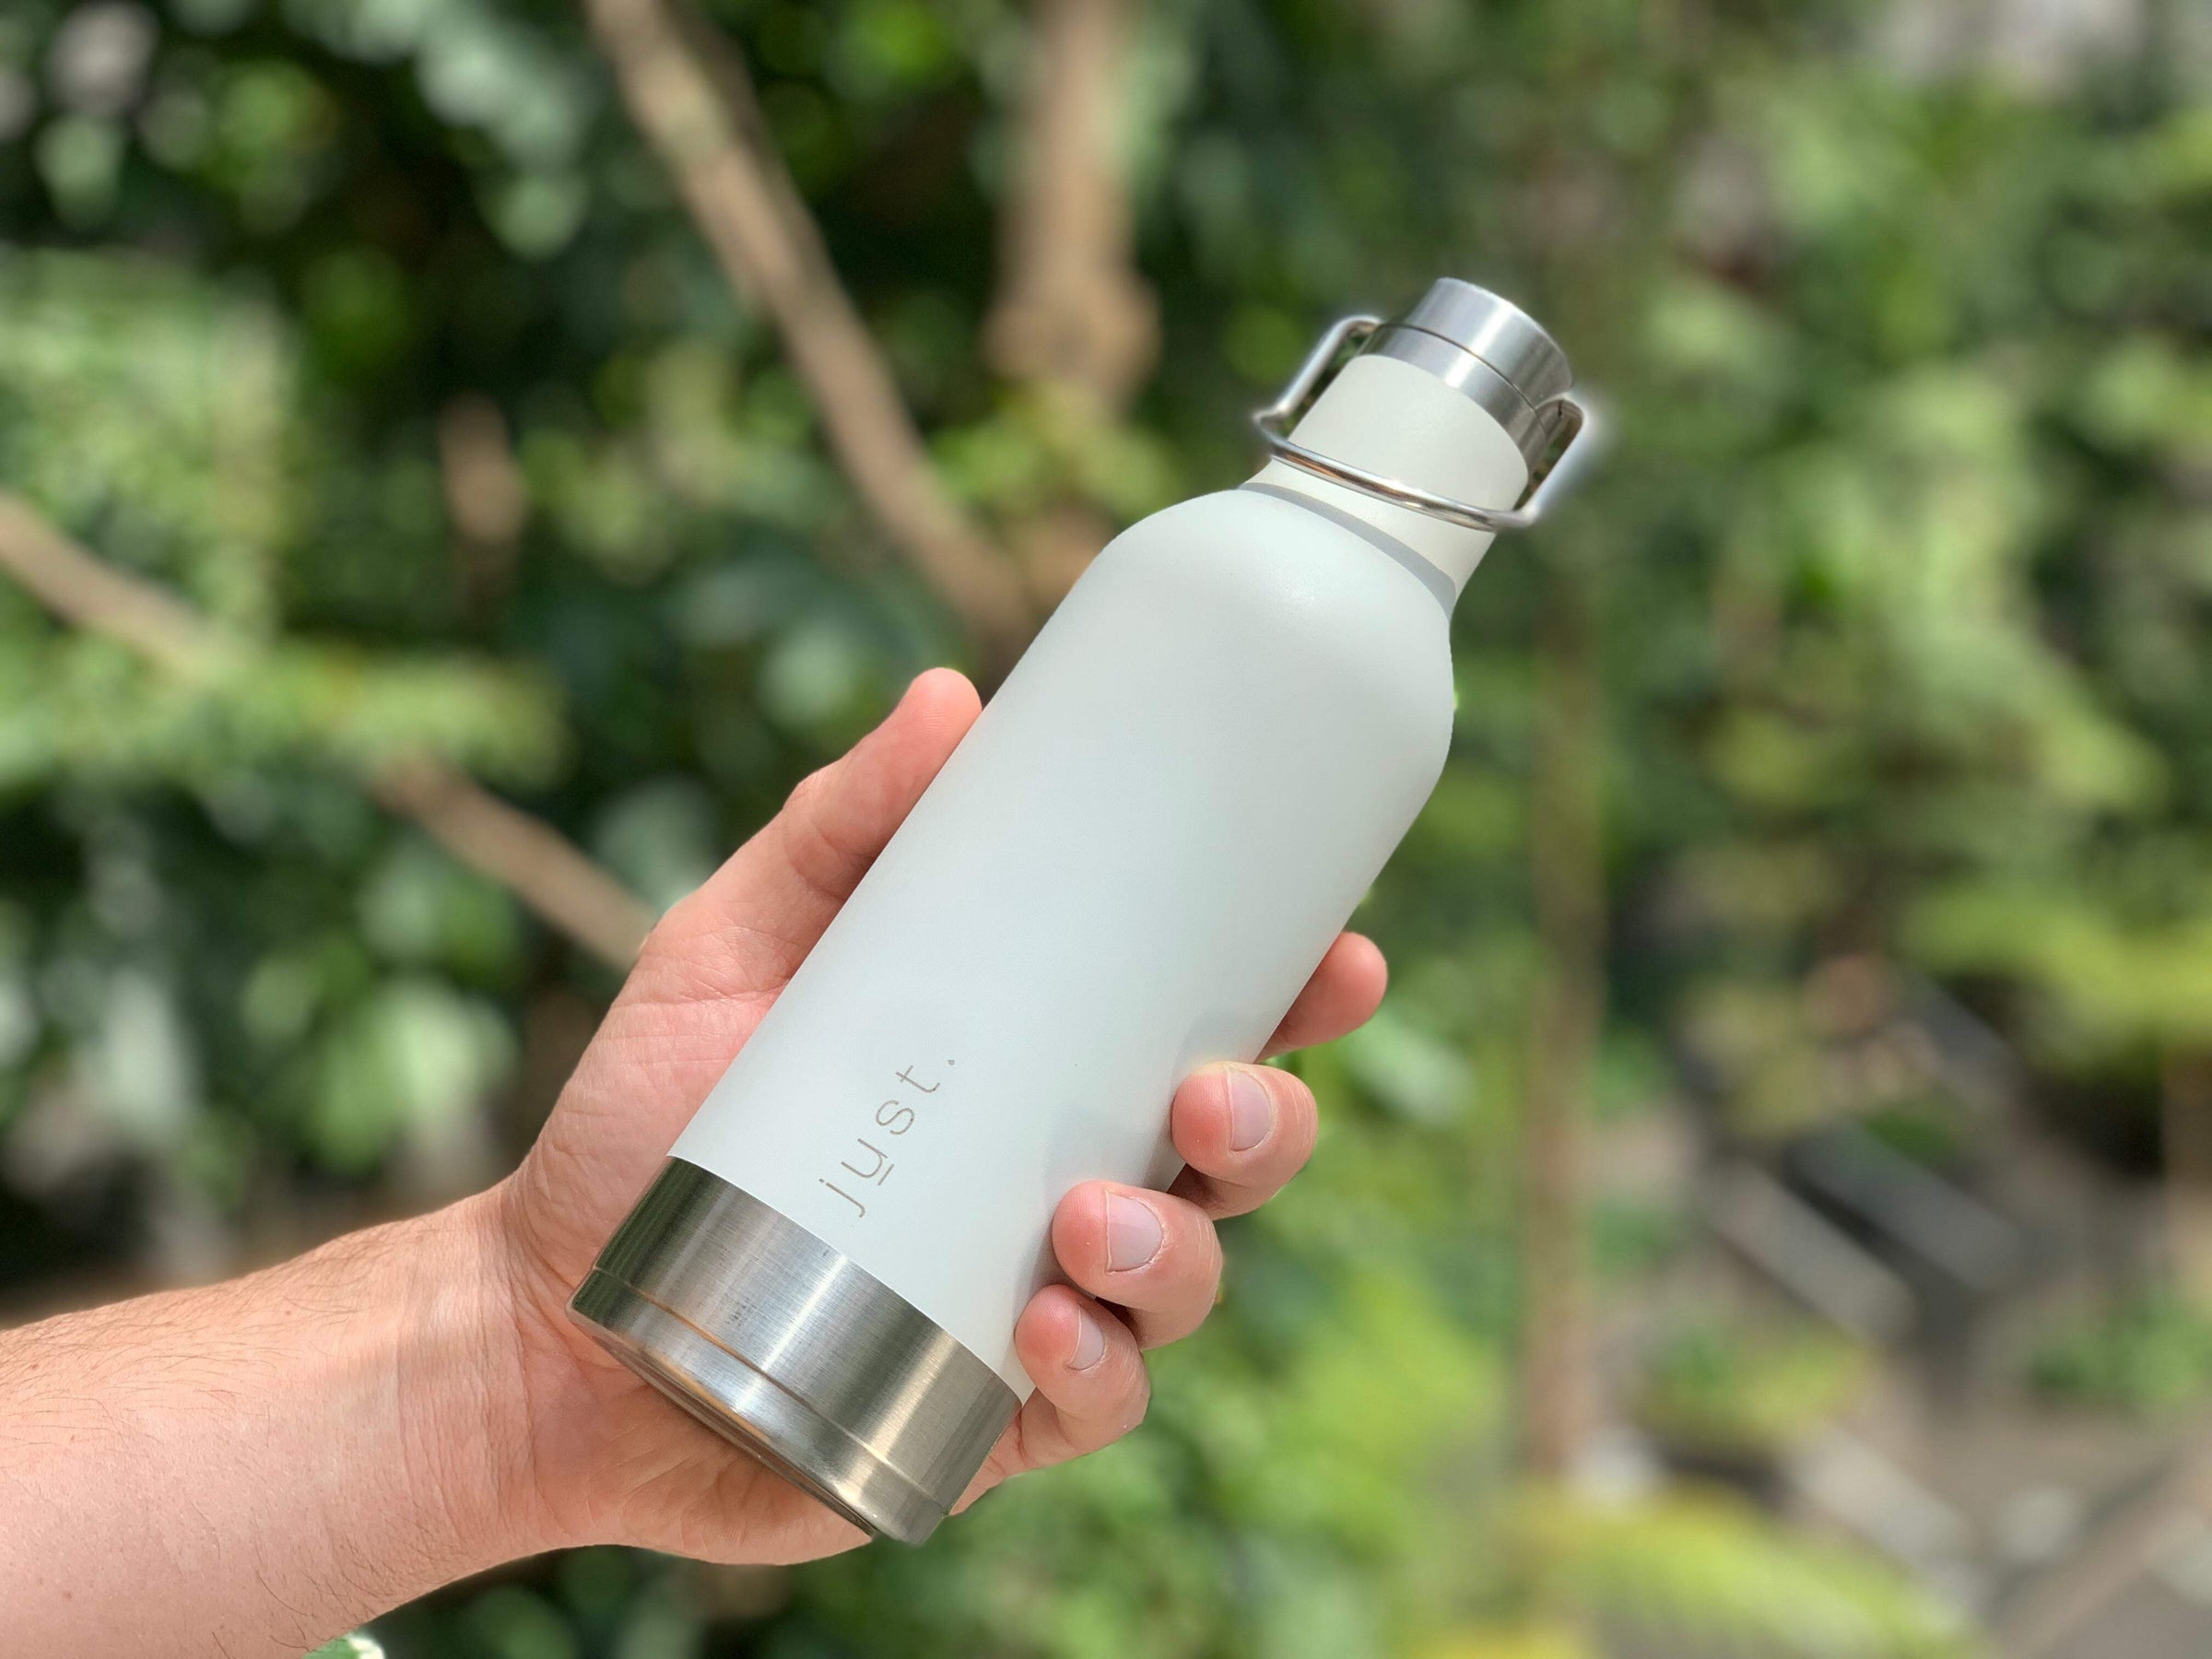 How to clean a reusable water bottle